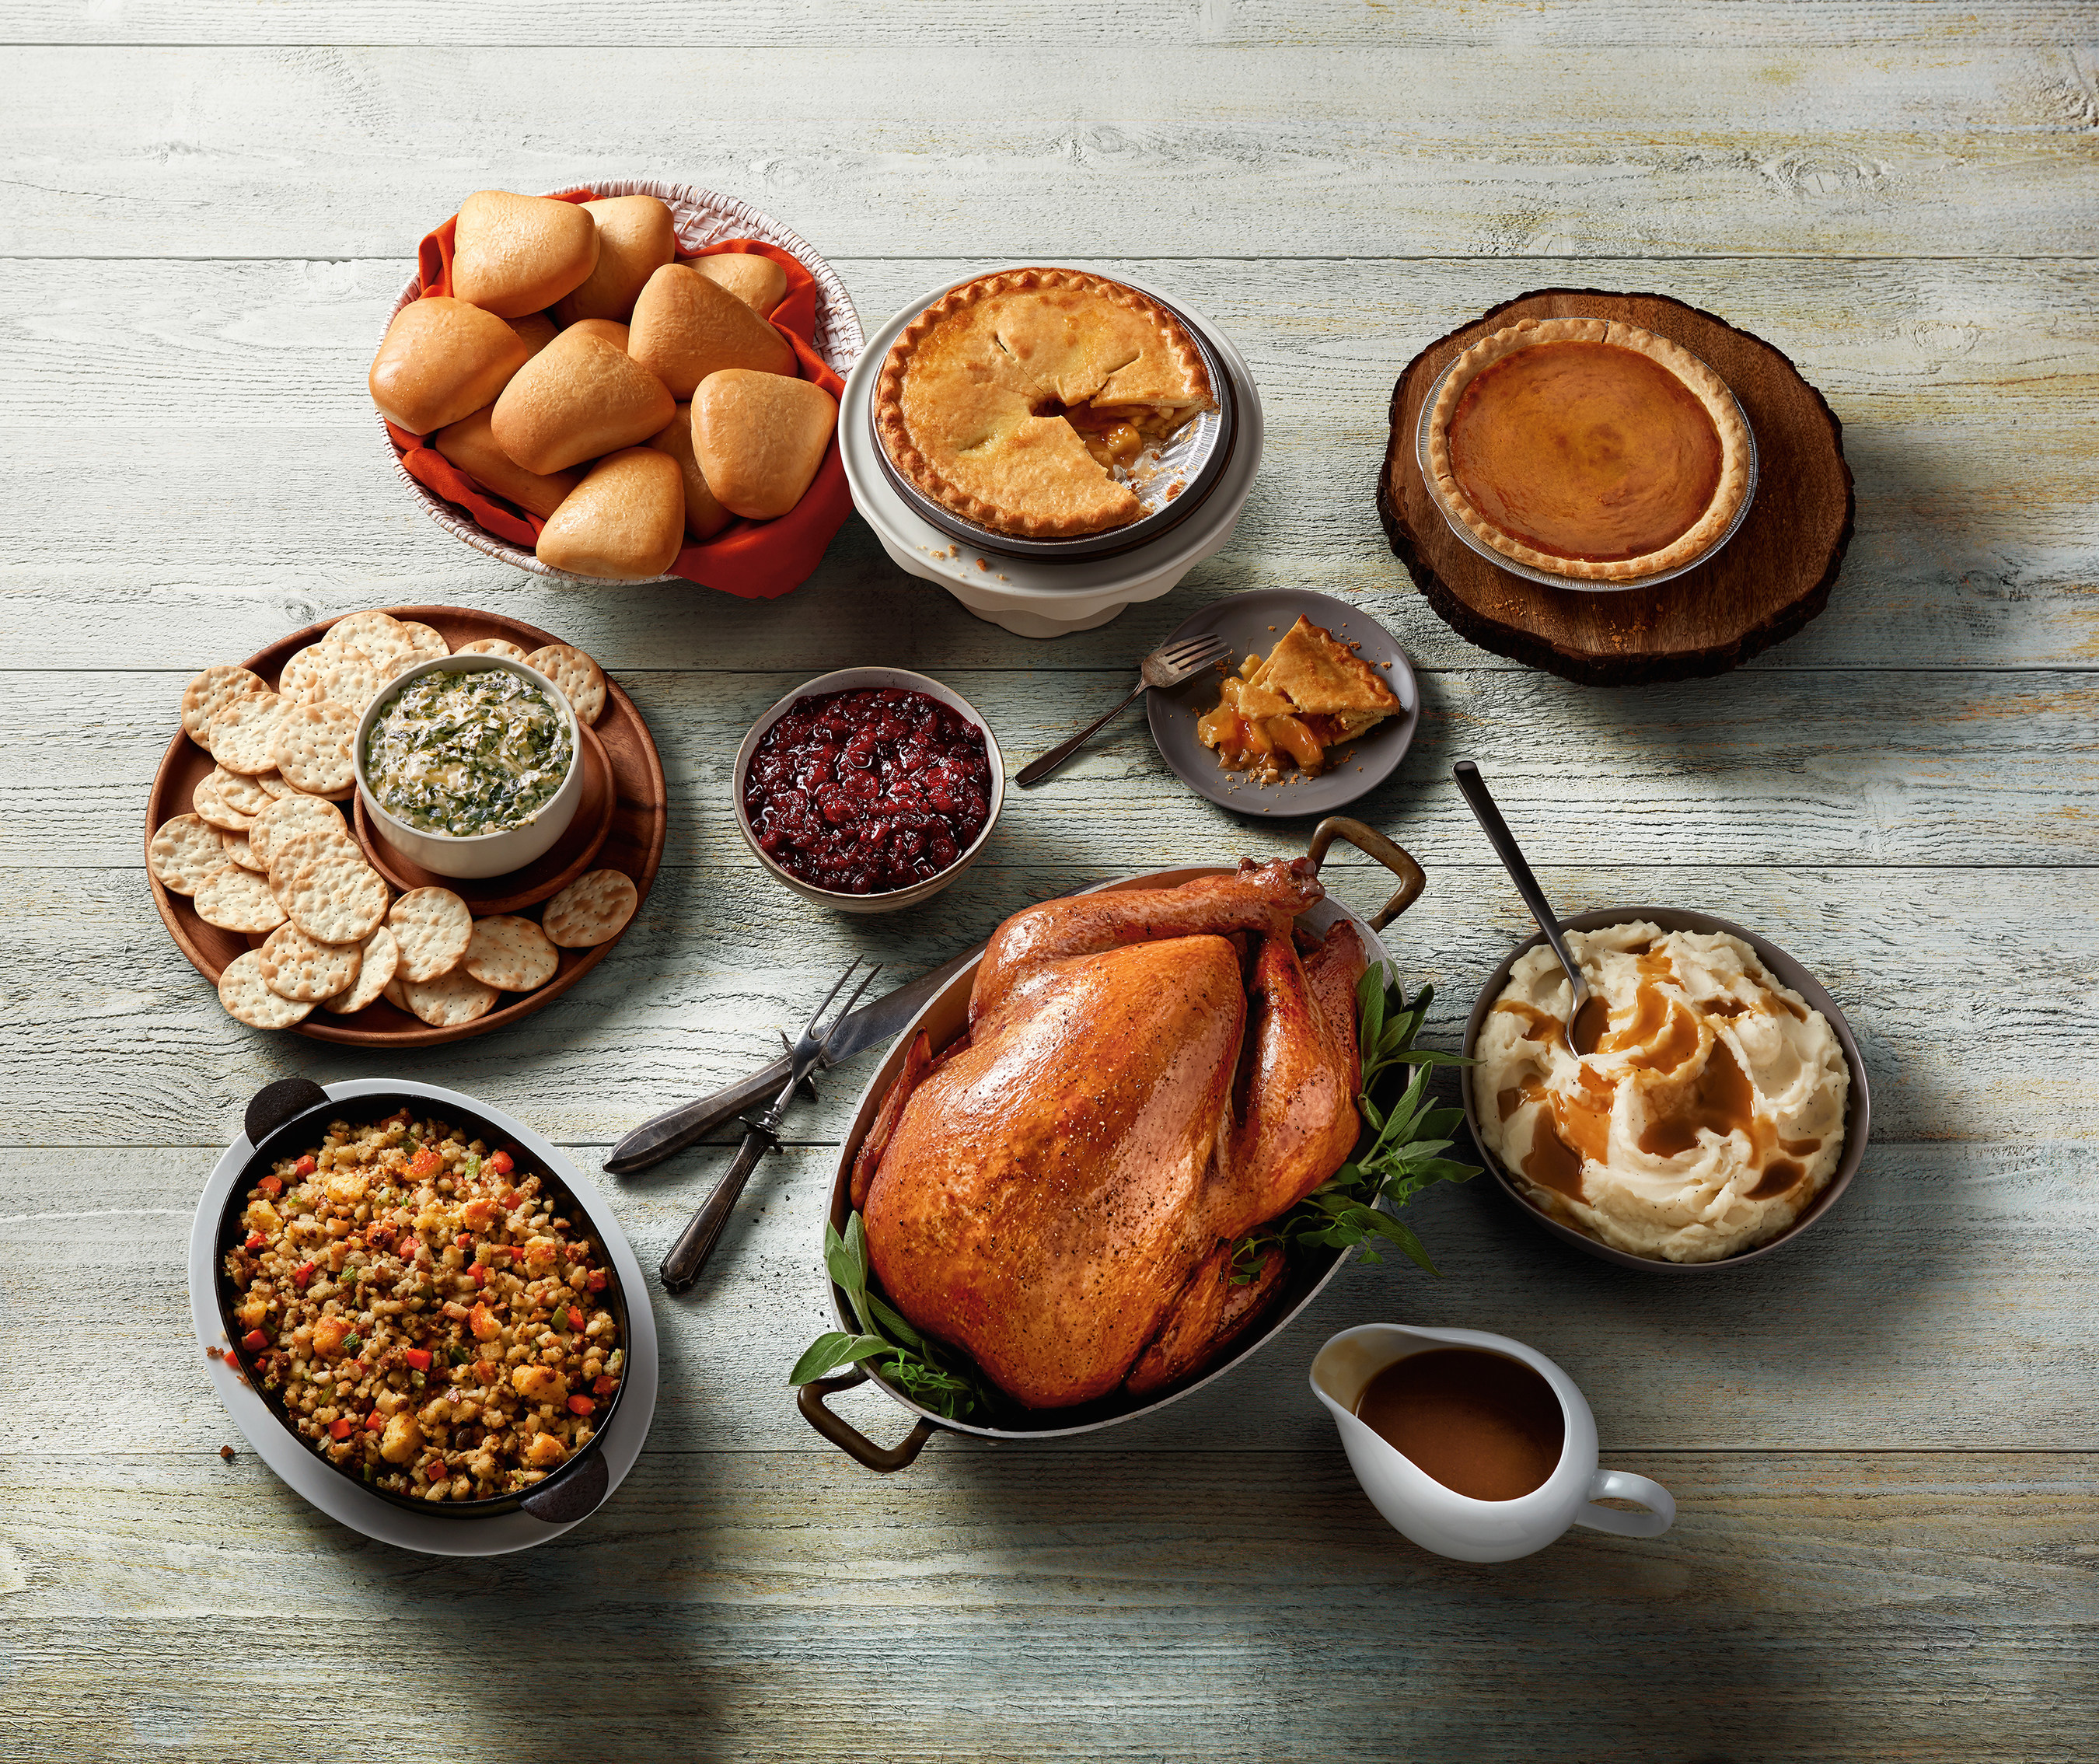 Boston Market Helps Put Joy On The Table This Thanksgiving With Complete Meal Options For Gatherings Of Every Size